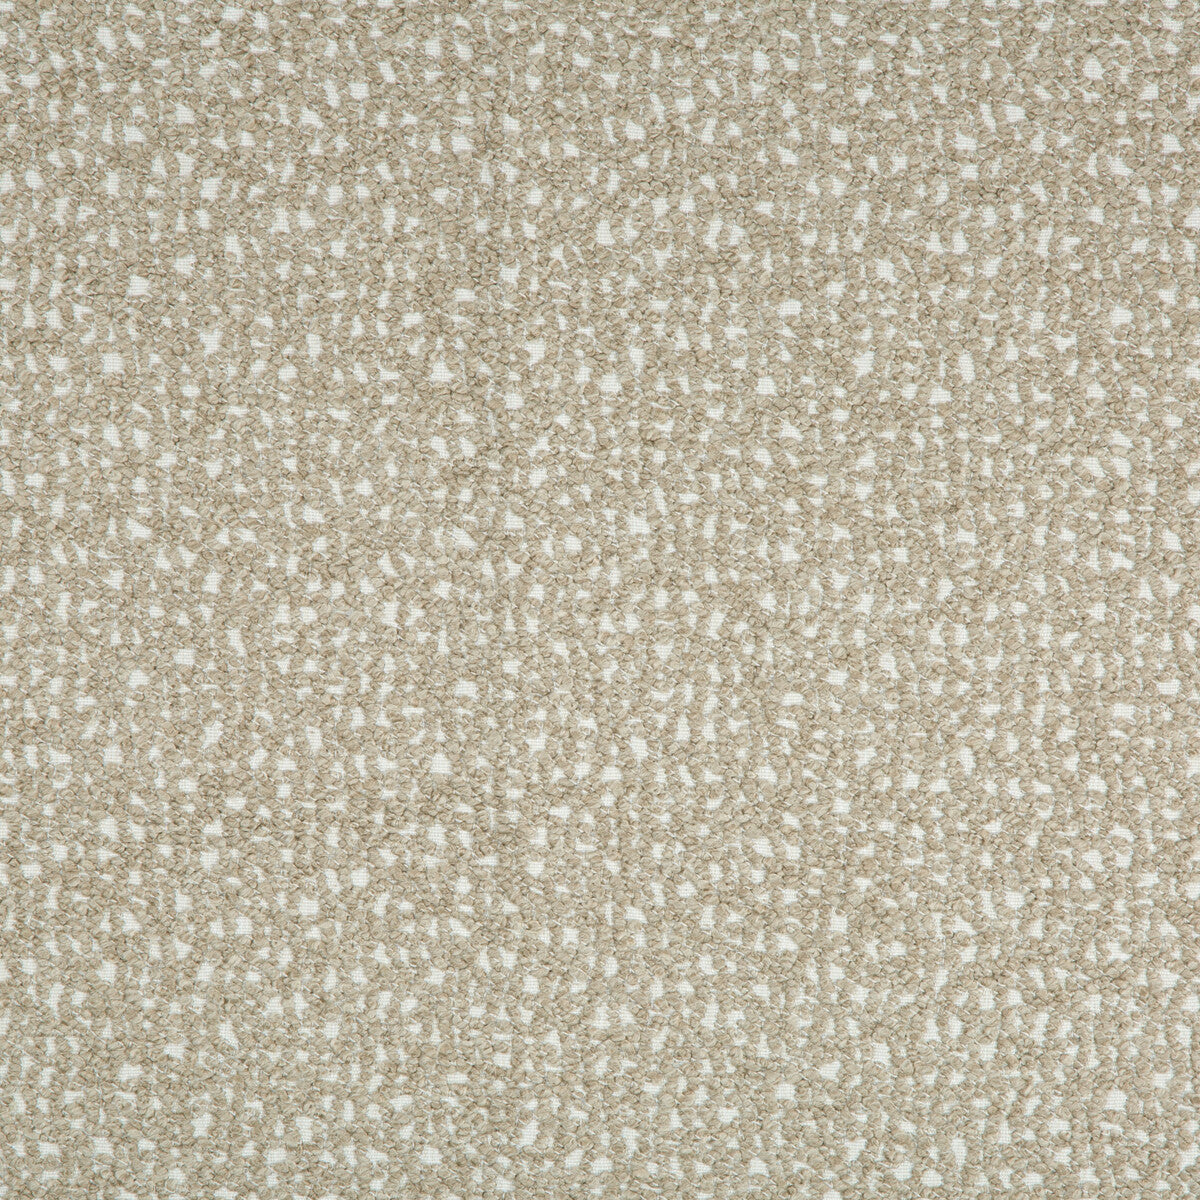 Serra fabric in pumice color - pattern GWF-3783.106.0 - by Lee Jofa Modern in the Kelly Wearstler Oculum Indoor/Outdoor collection